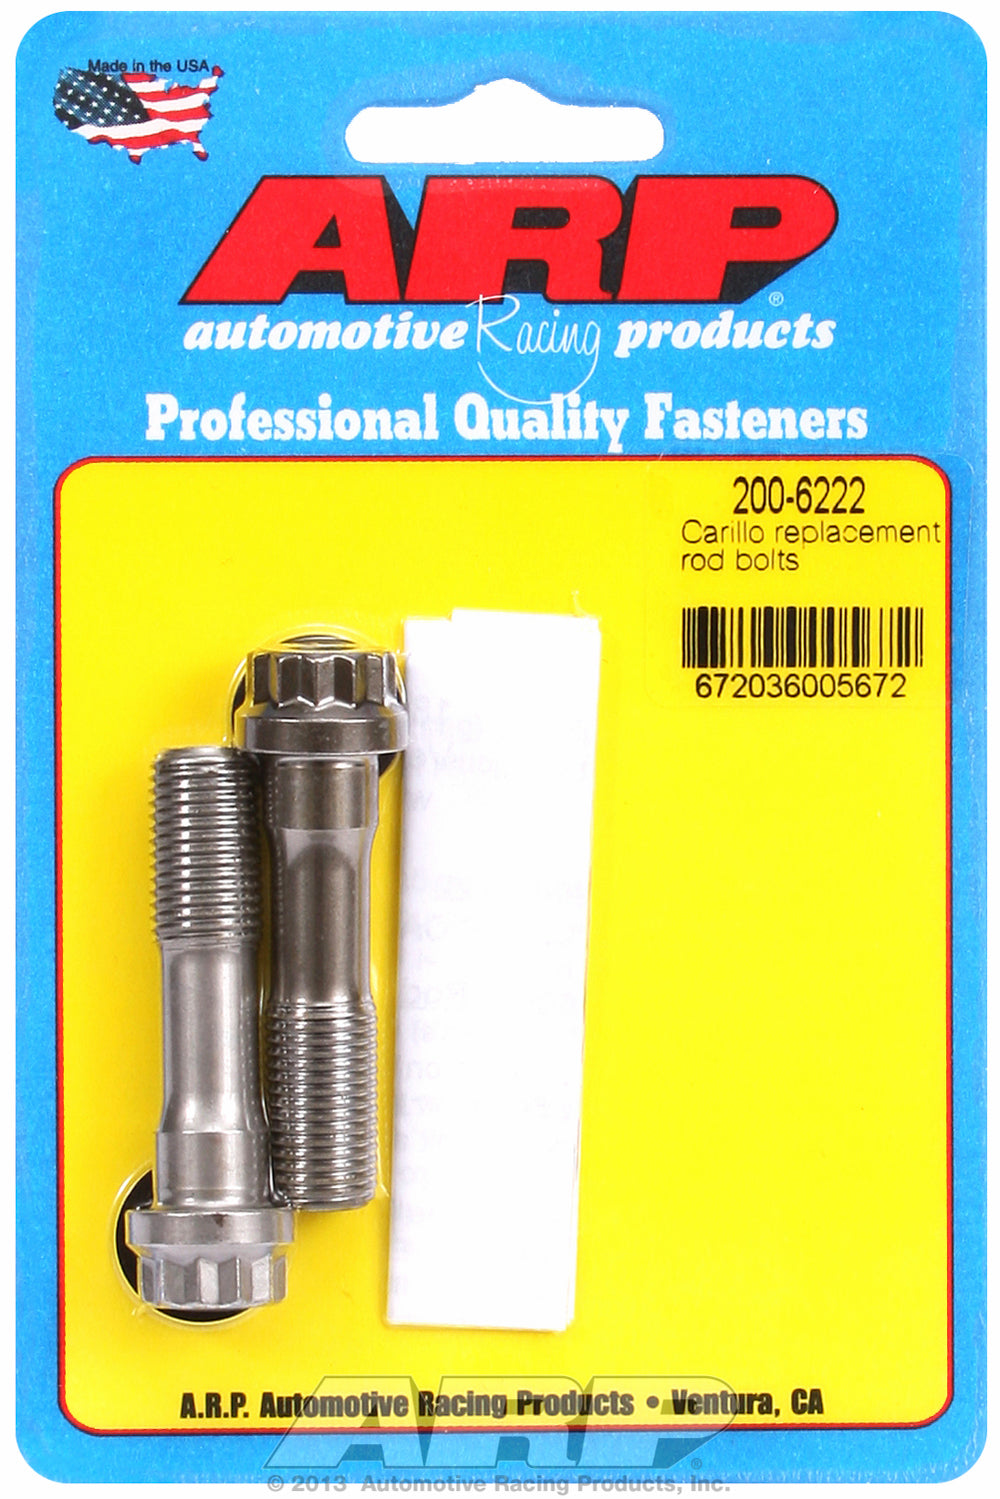 ARP2000 General Replacement Rod Bolt Kit 2-pc Carillo Replacement